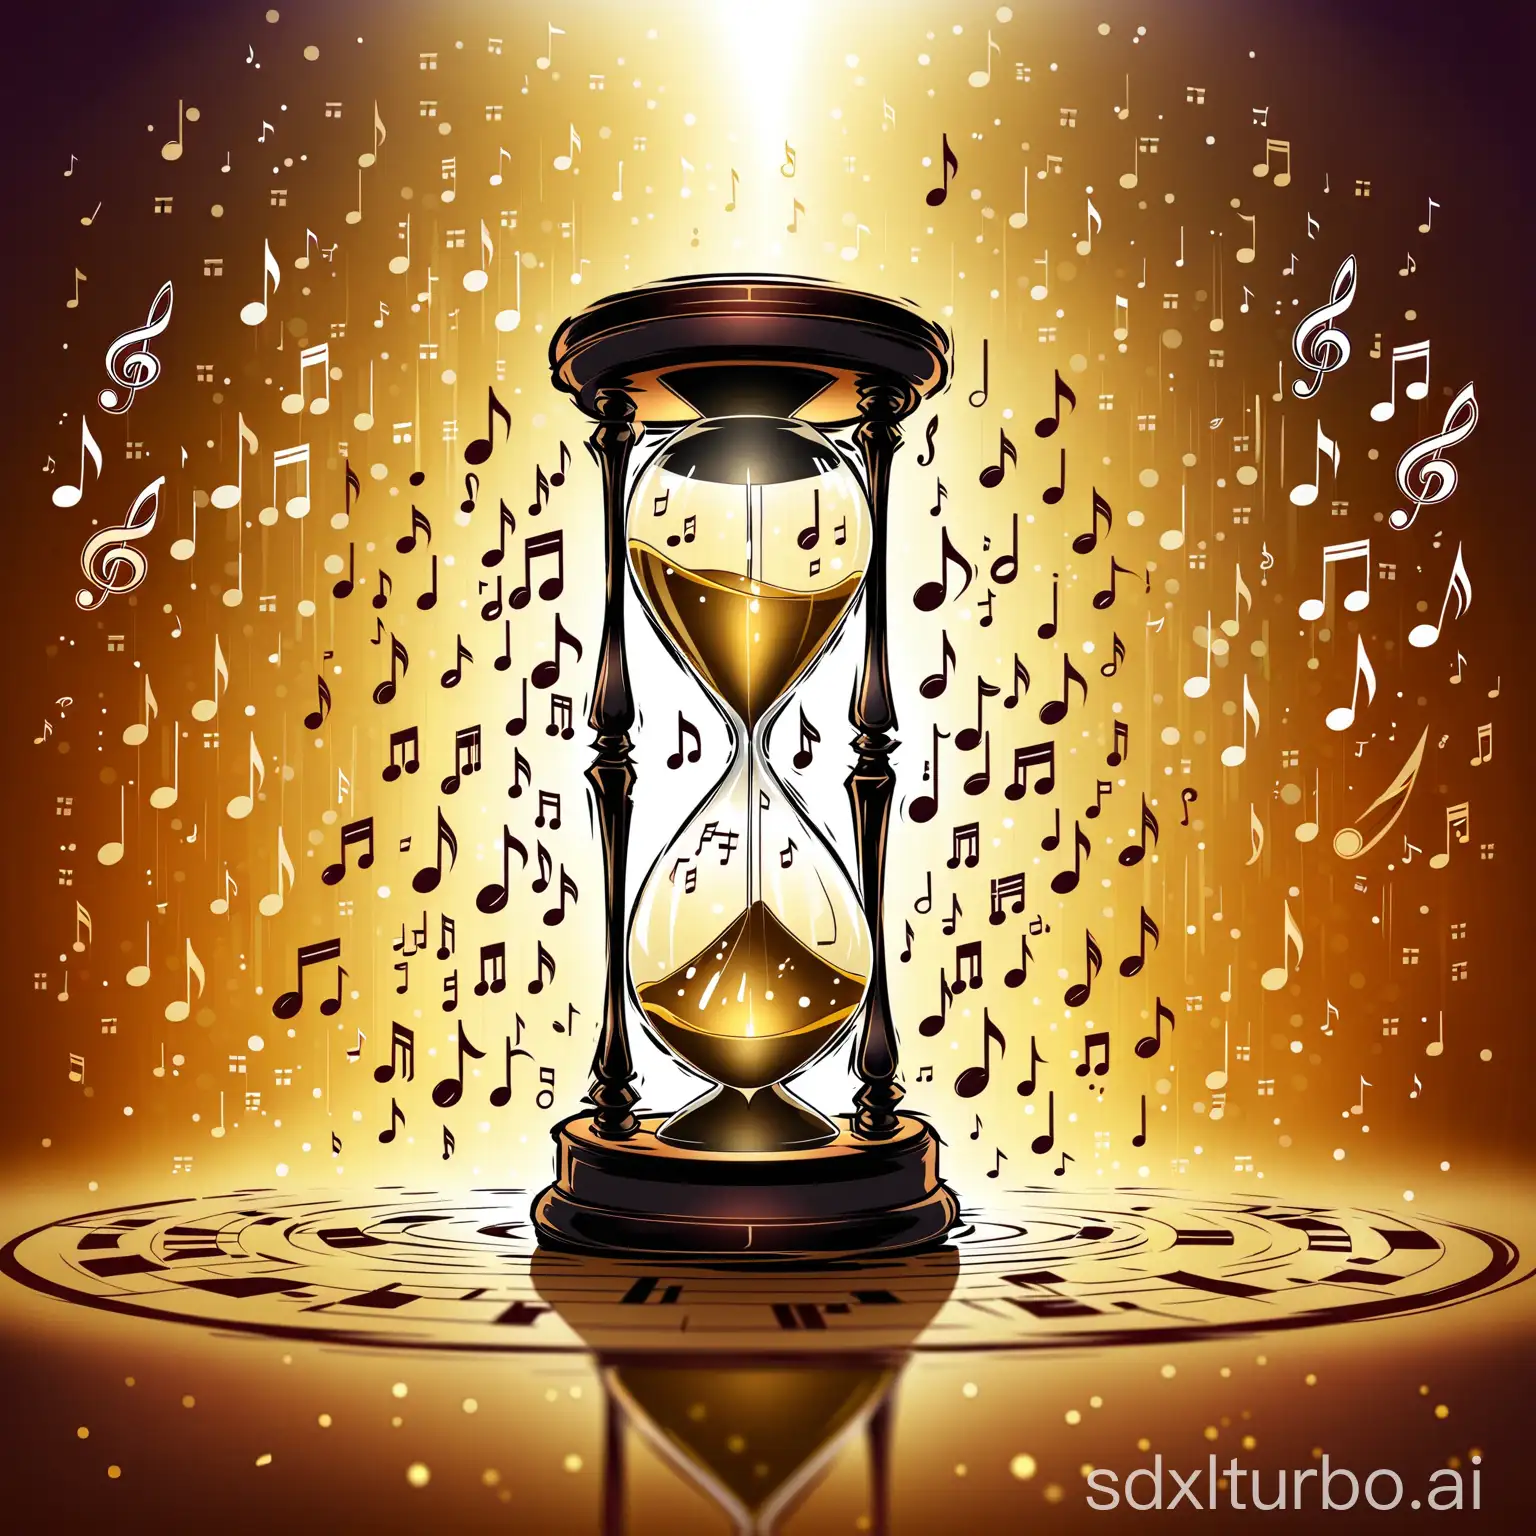 Historical-Hourglass-Dance-of-Musical-Symbols